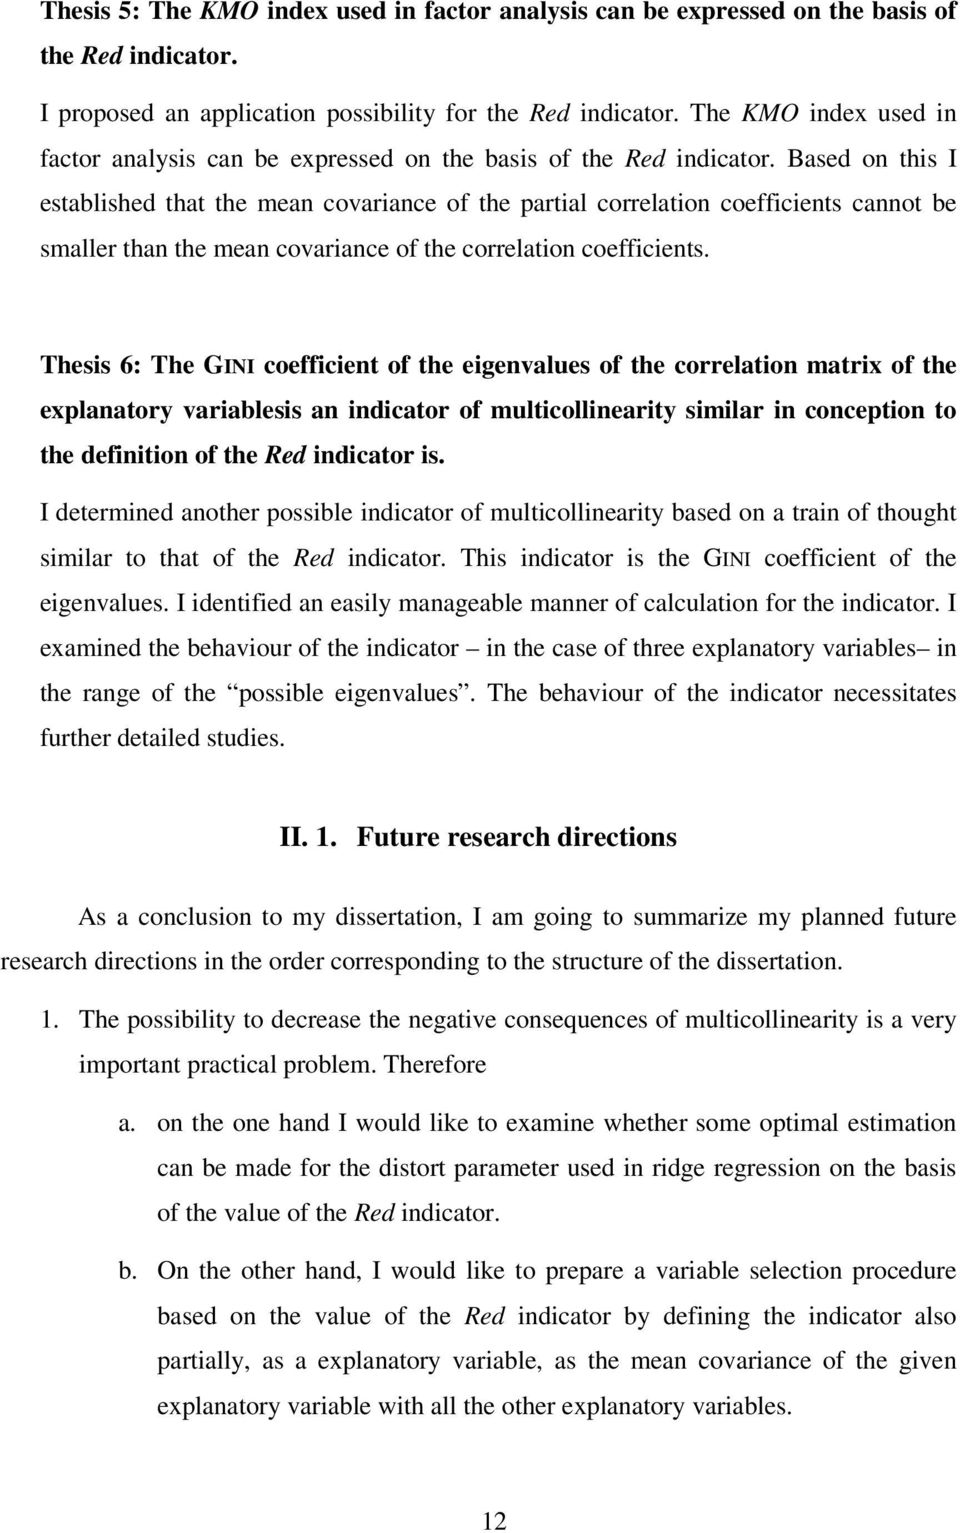 Based on this I established that the ean covariance of the partial correlation coefficients cannot be saller than the ean covariance of the correlation coefficients.